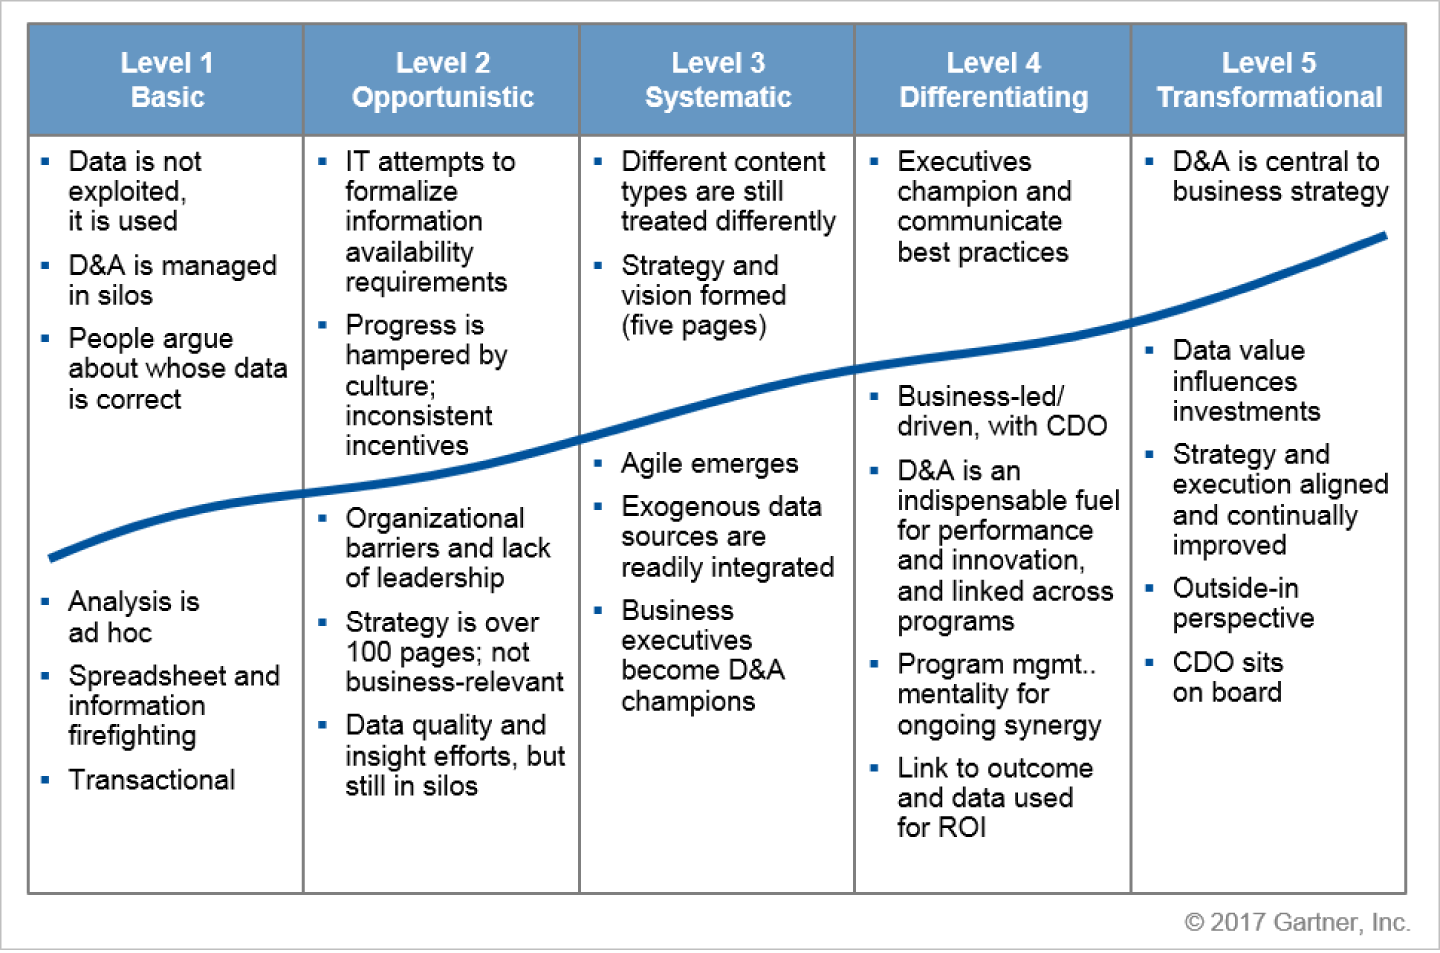 Overview of the Maturity Model for data and analytics (source: Gartner [October 2017]; D&A = data and analytics; ROI = return on investment)